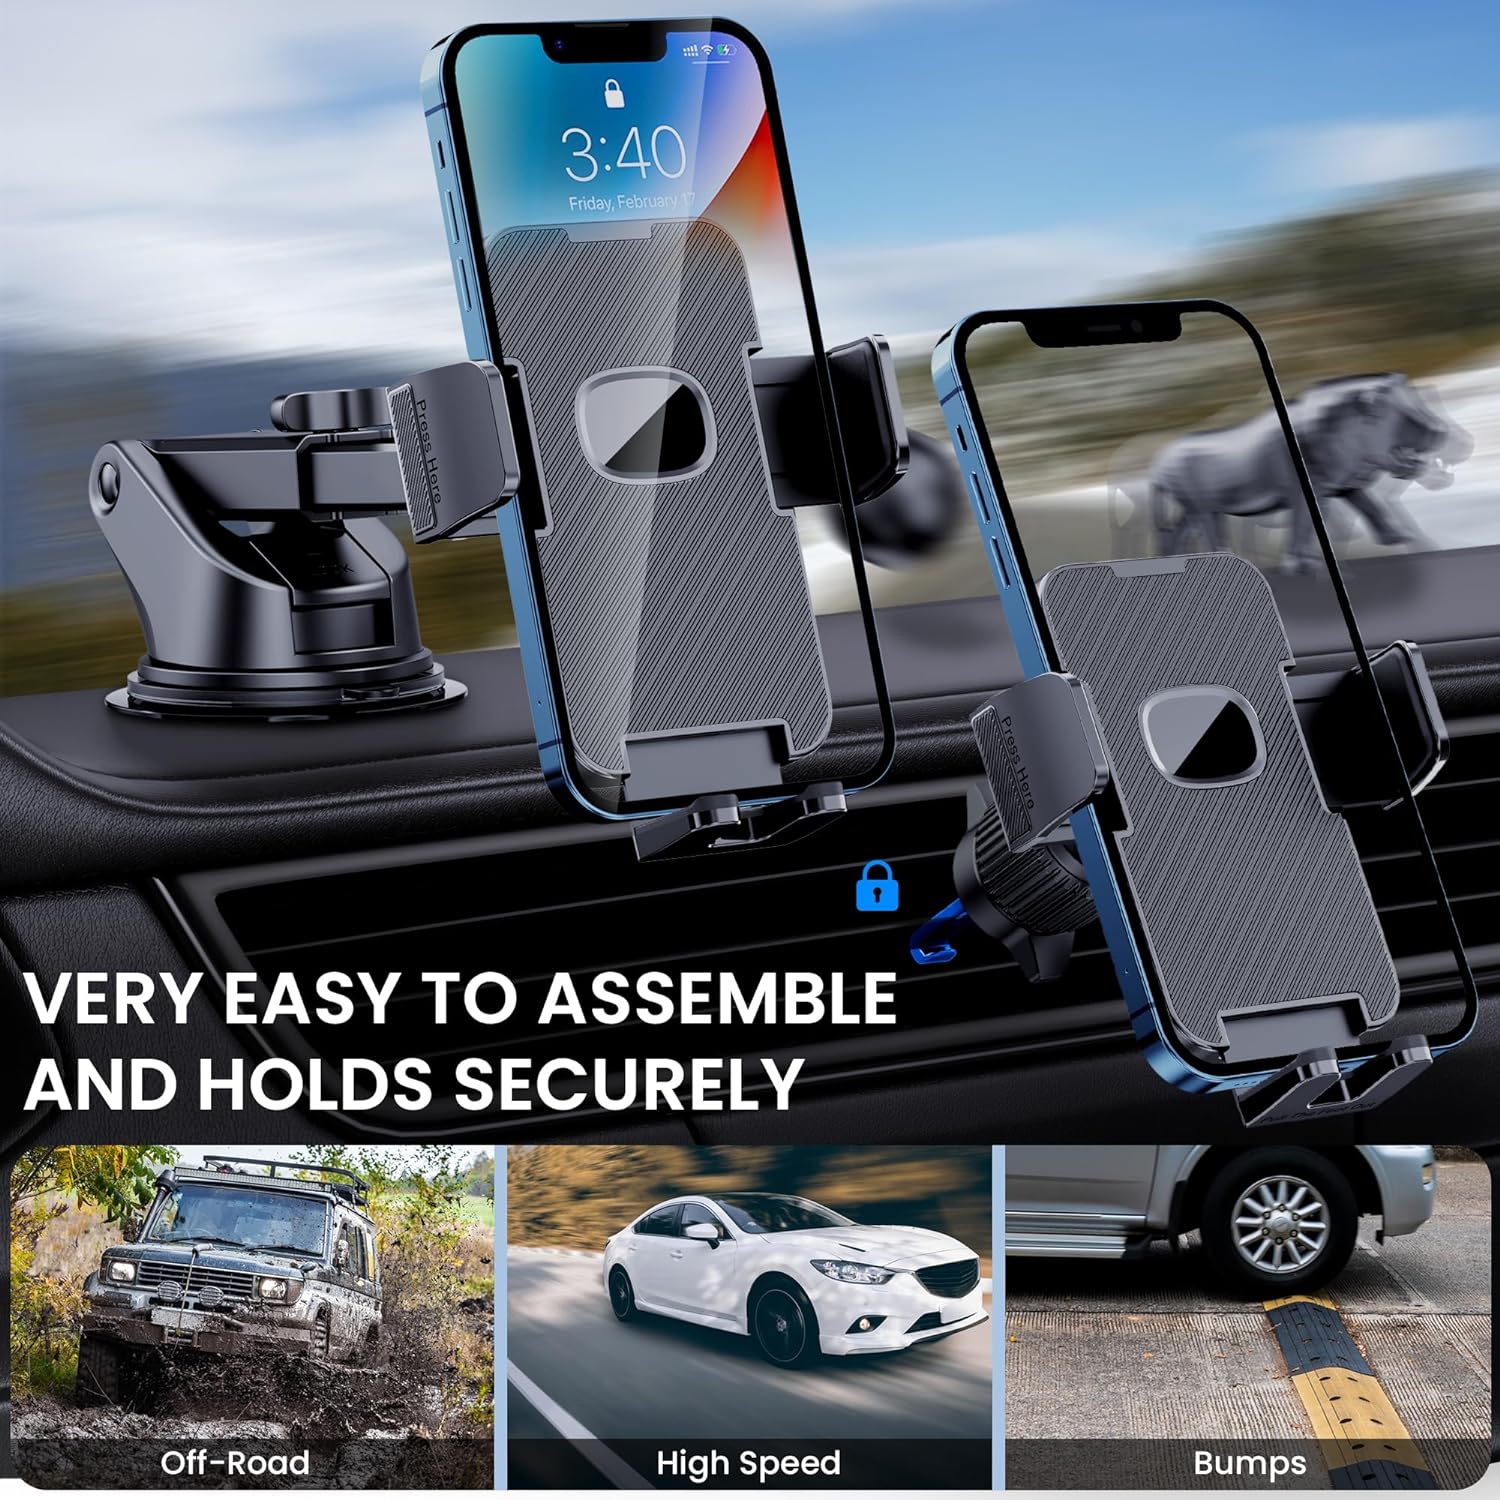 Phone Holder Car Mount for iPhone [Powerful Suction]Phone Mount for Car Dashboard Windshield Air Vent Universal Accessories [Thick Cases Friendly]Automobile Cell Phone Holder Fit for iPhone Smartphone